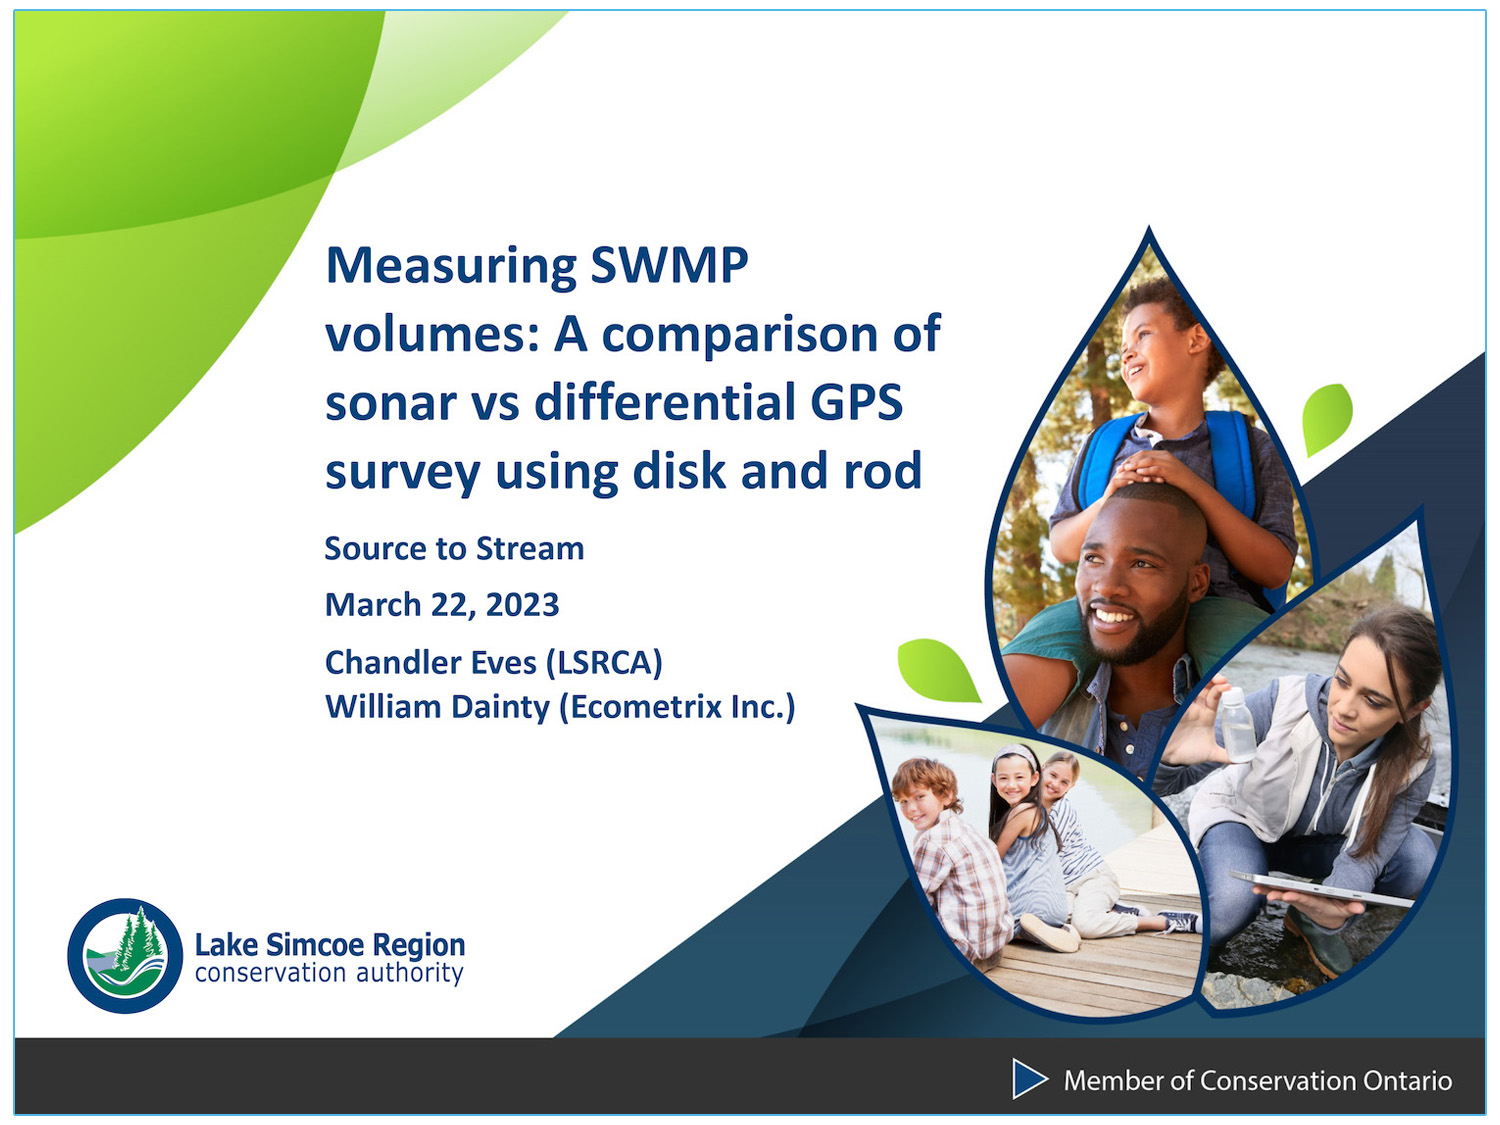 Stormwater Pond Volume Measurement Methods - A Comparison of RTK 9 Beam Sonar versus Geodetic Survey with Disk and Rod - Presenters: Chandler Eves - Lake Simcoe Region Conservation Authority - William Dainty - Ecometrix Inc